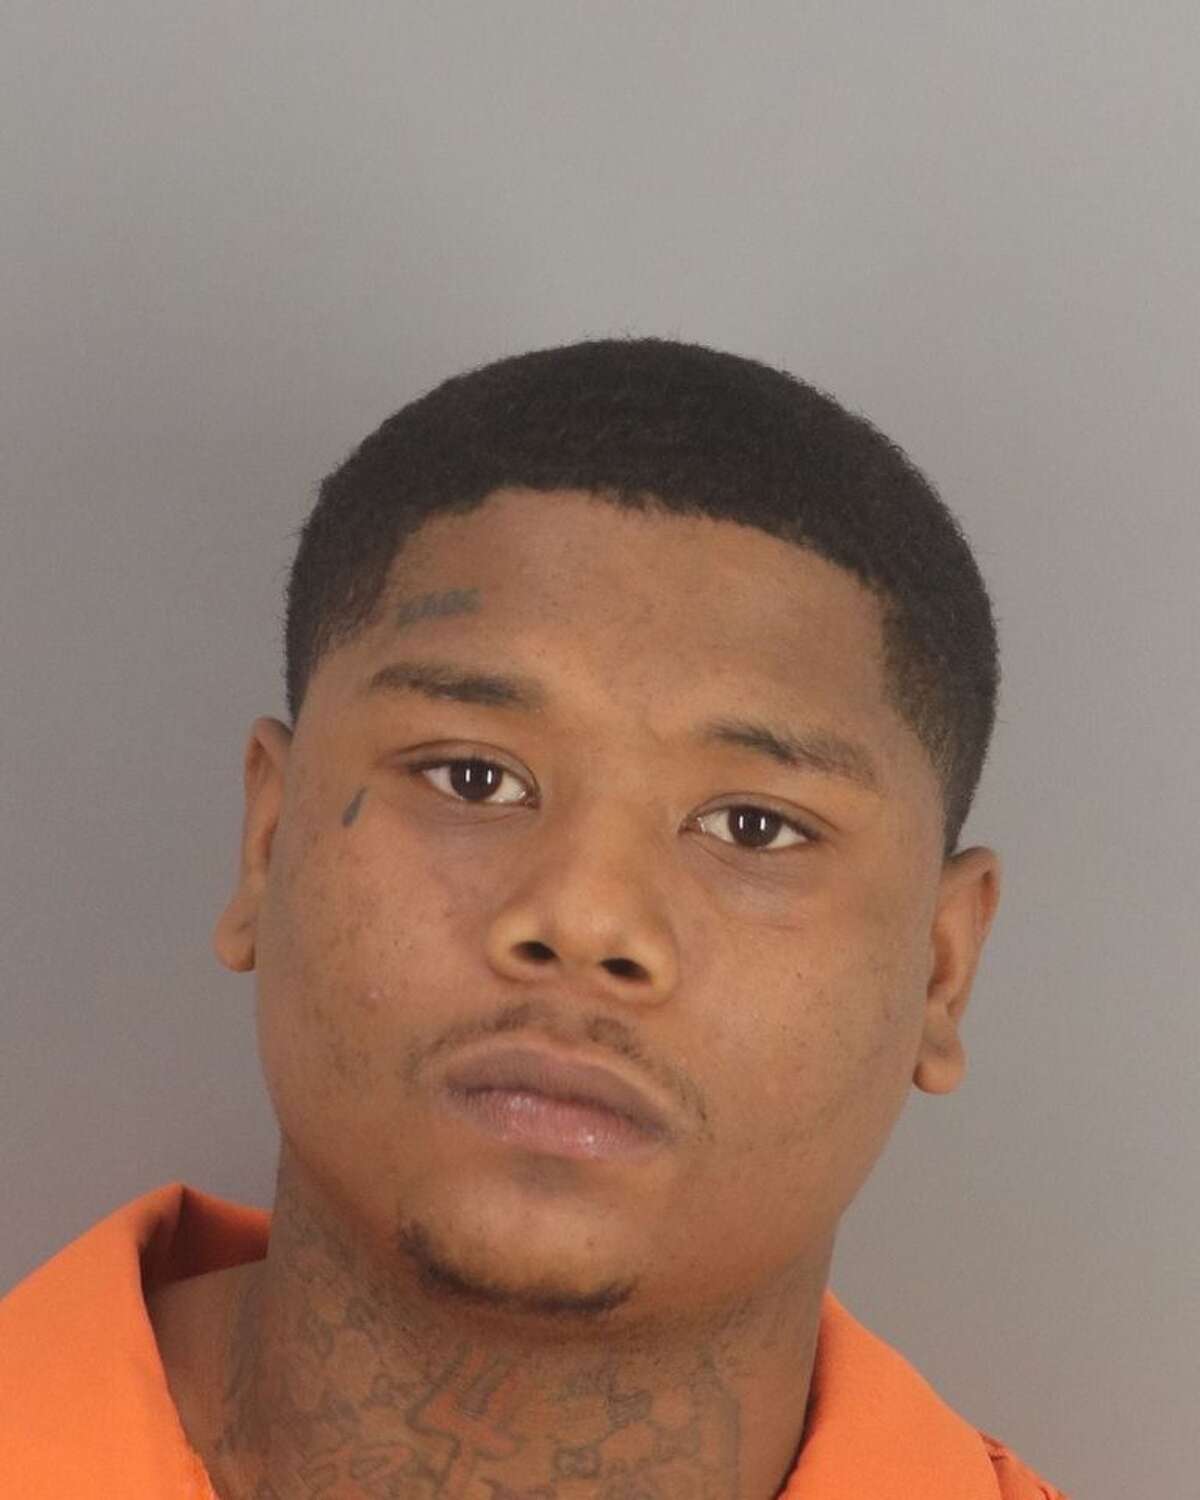 The Groves Police Department is seeking the public's assistance in locating Darionte Everfield, 20, of Port Arthur for the alleged murder of Alfonso Solomon, 19.